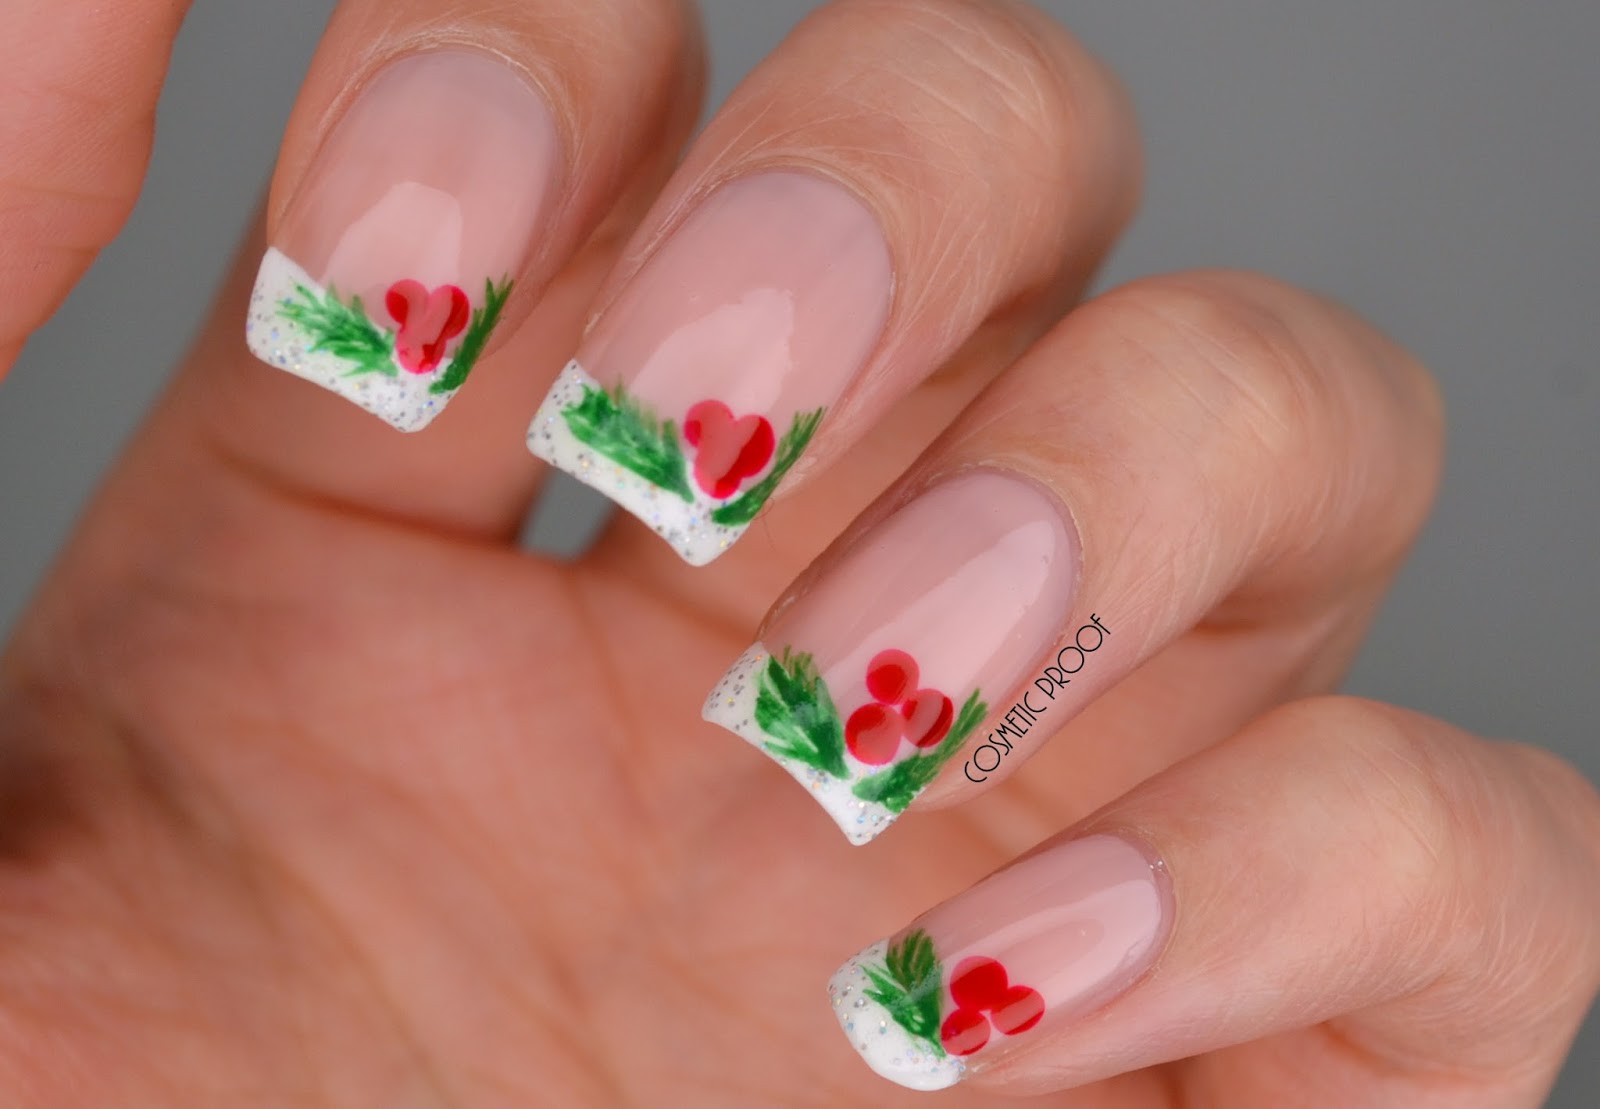 5. "Red and Gold French Manicure for the Holidays" - wide 4